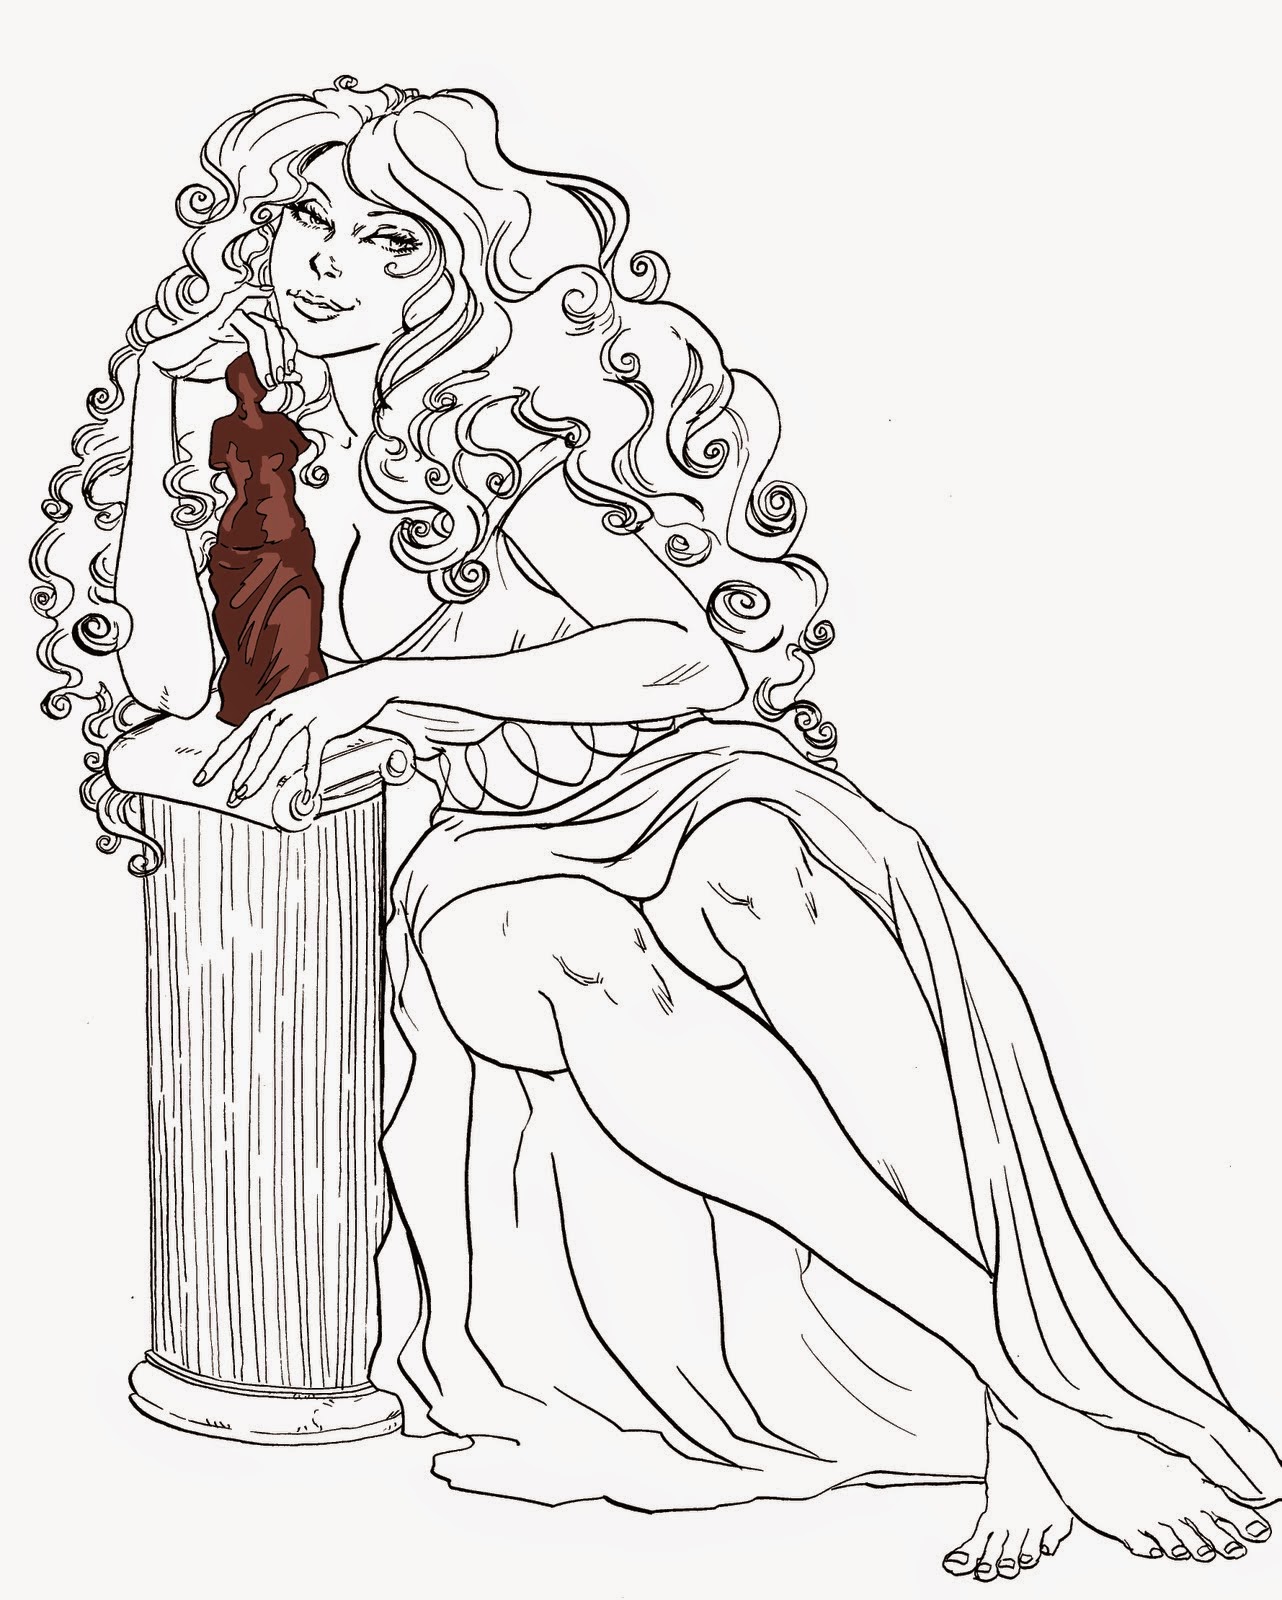 I drew this piece, Chocolate Aphrodite, for a charity auction. 